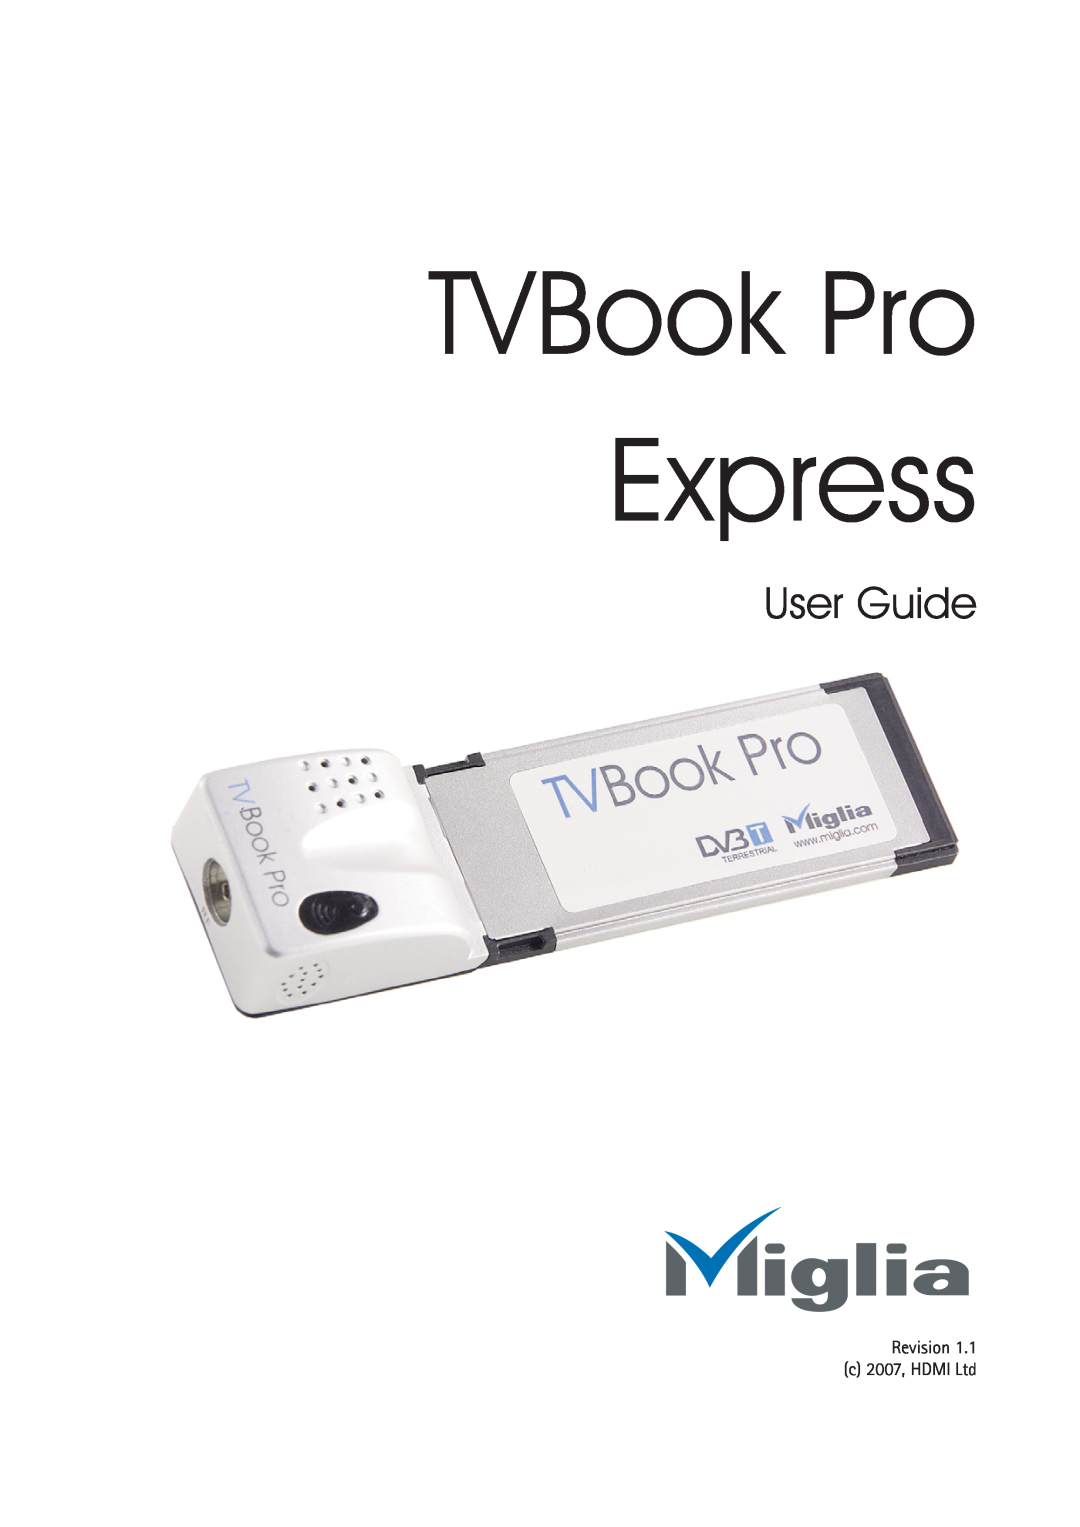 Miglia Technology TV Tuner Adapter manual TVBook Pro Express, User Guide 